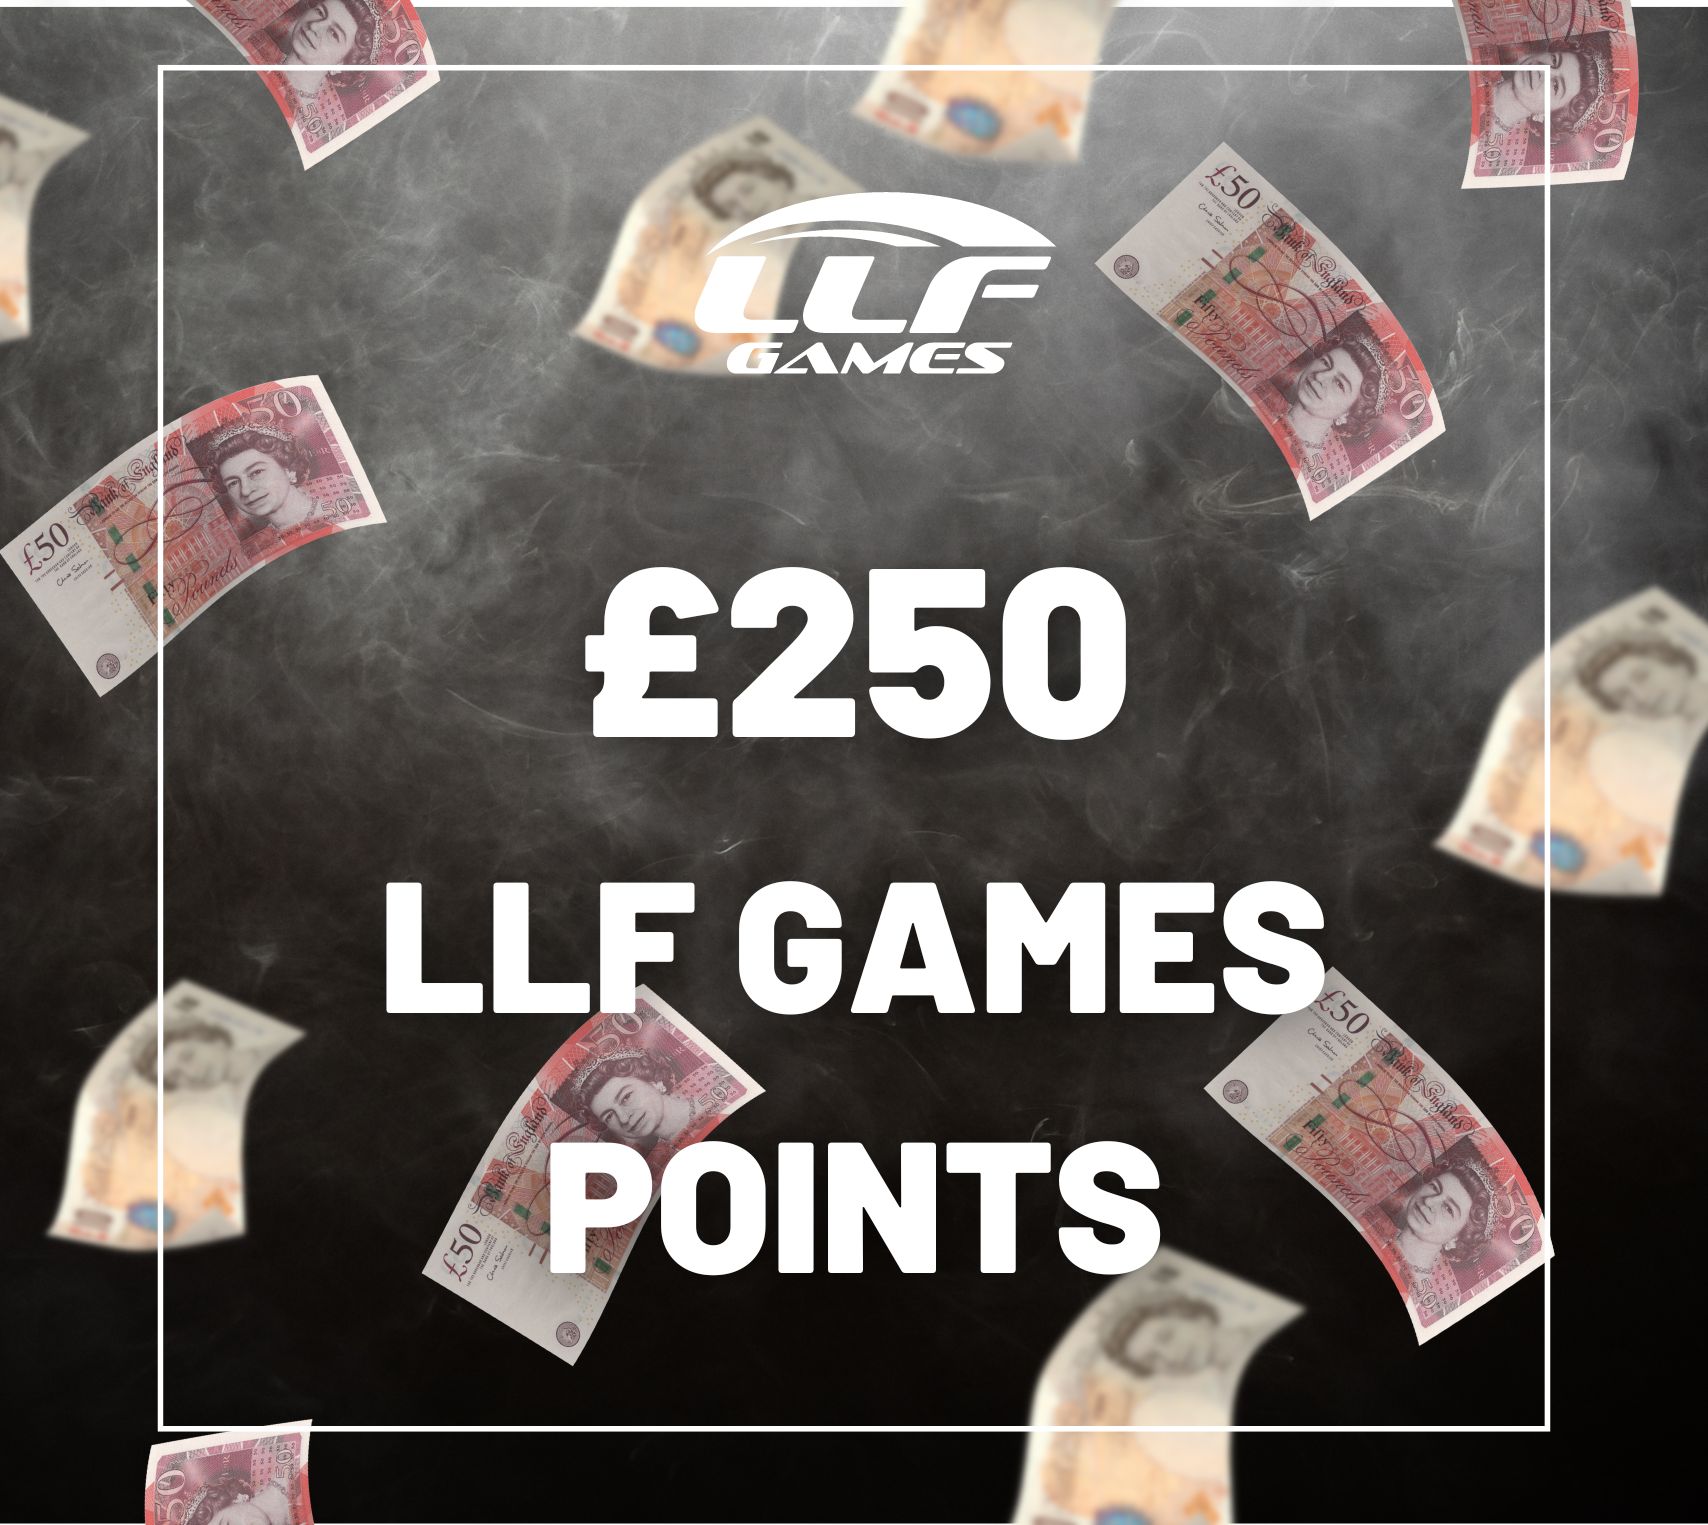 £250 Site Credit (LLF Games Points)